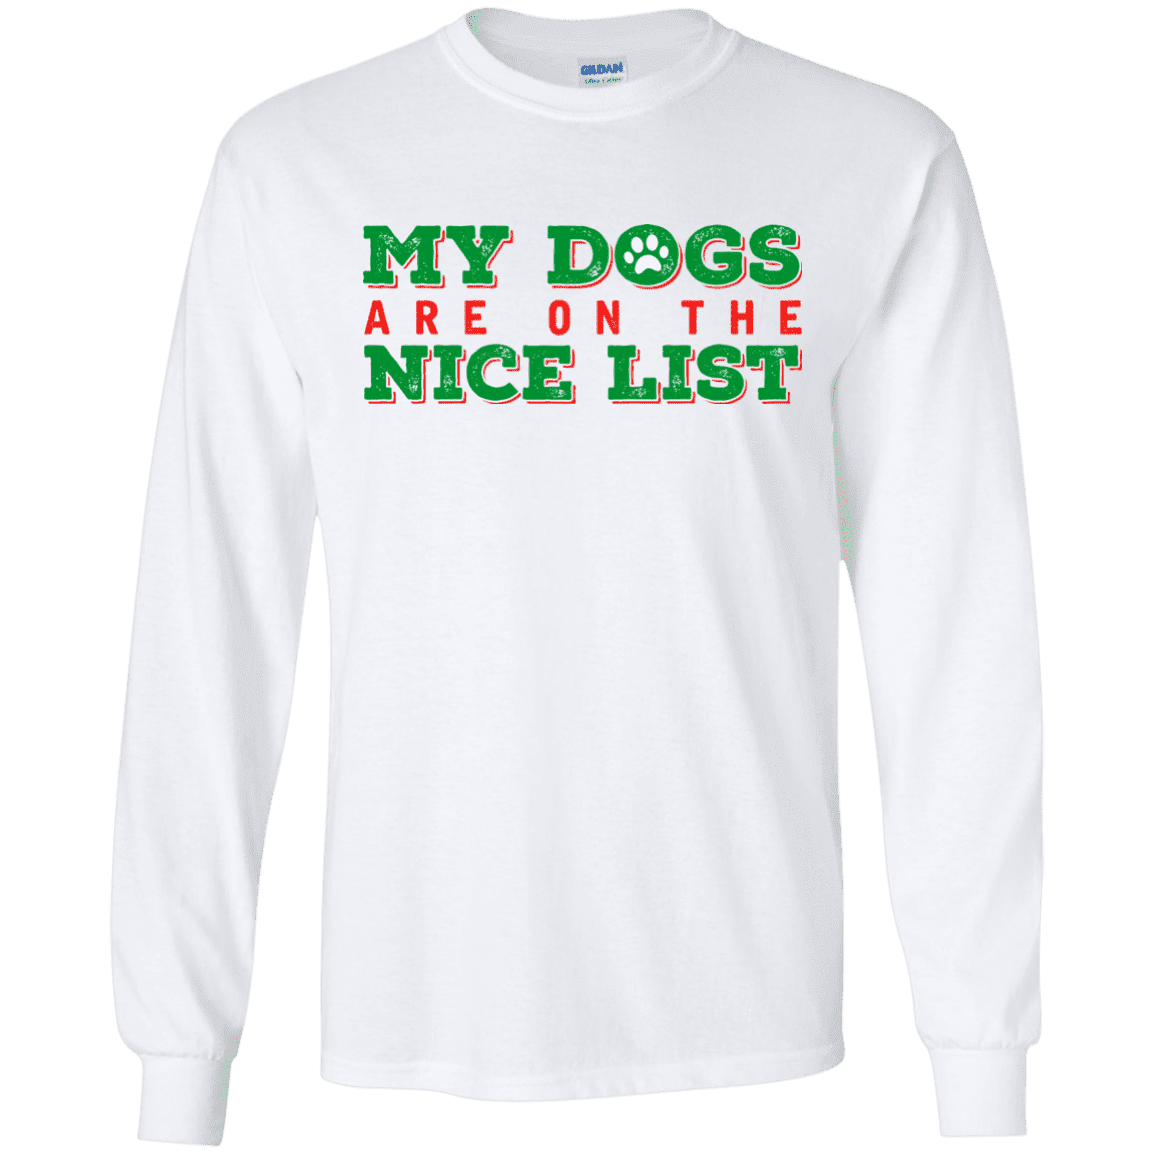 My Dogs Are On The Nice List - White Long Sleeve T-Shirt.